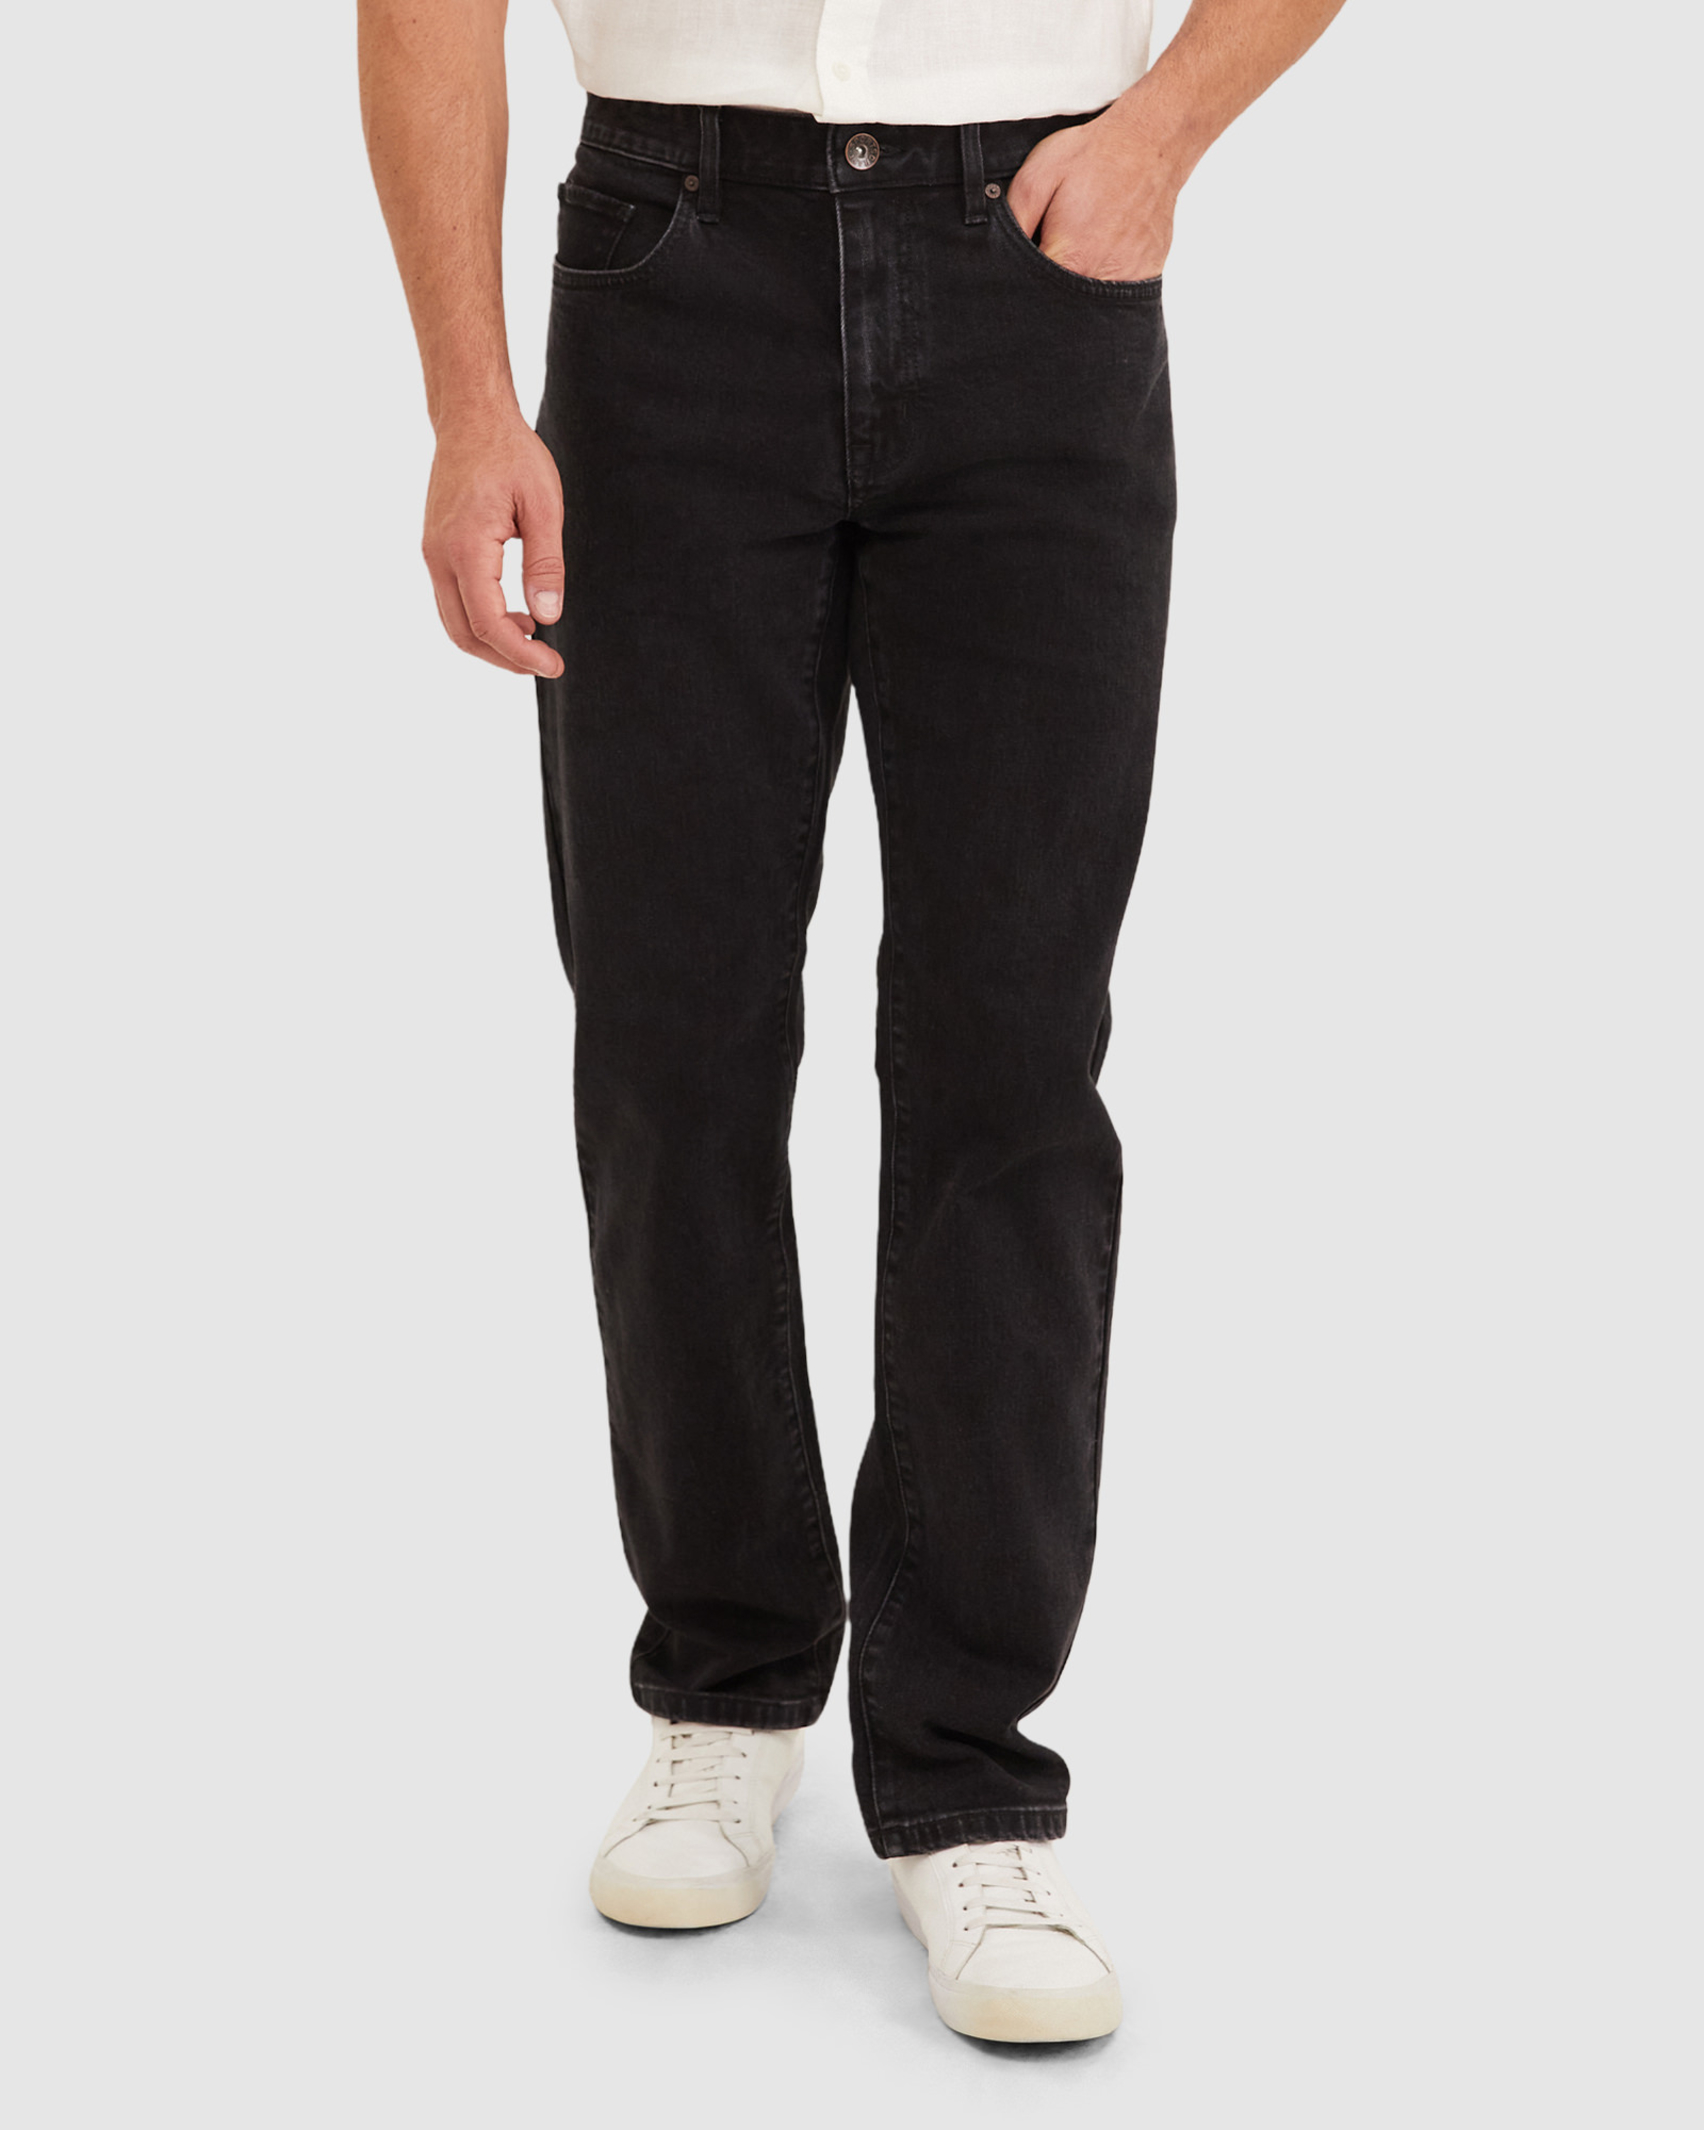 Grayson Straight Jean in WASHED BLACK